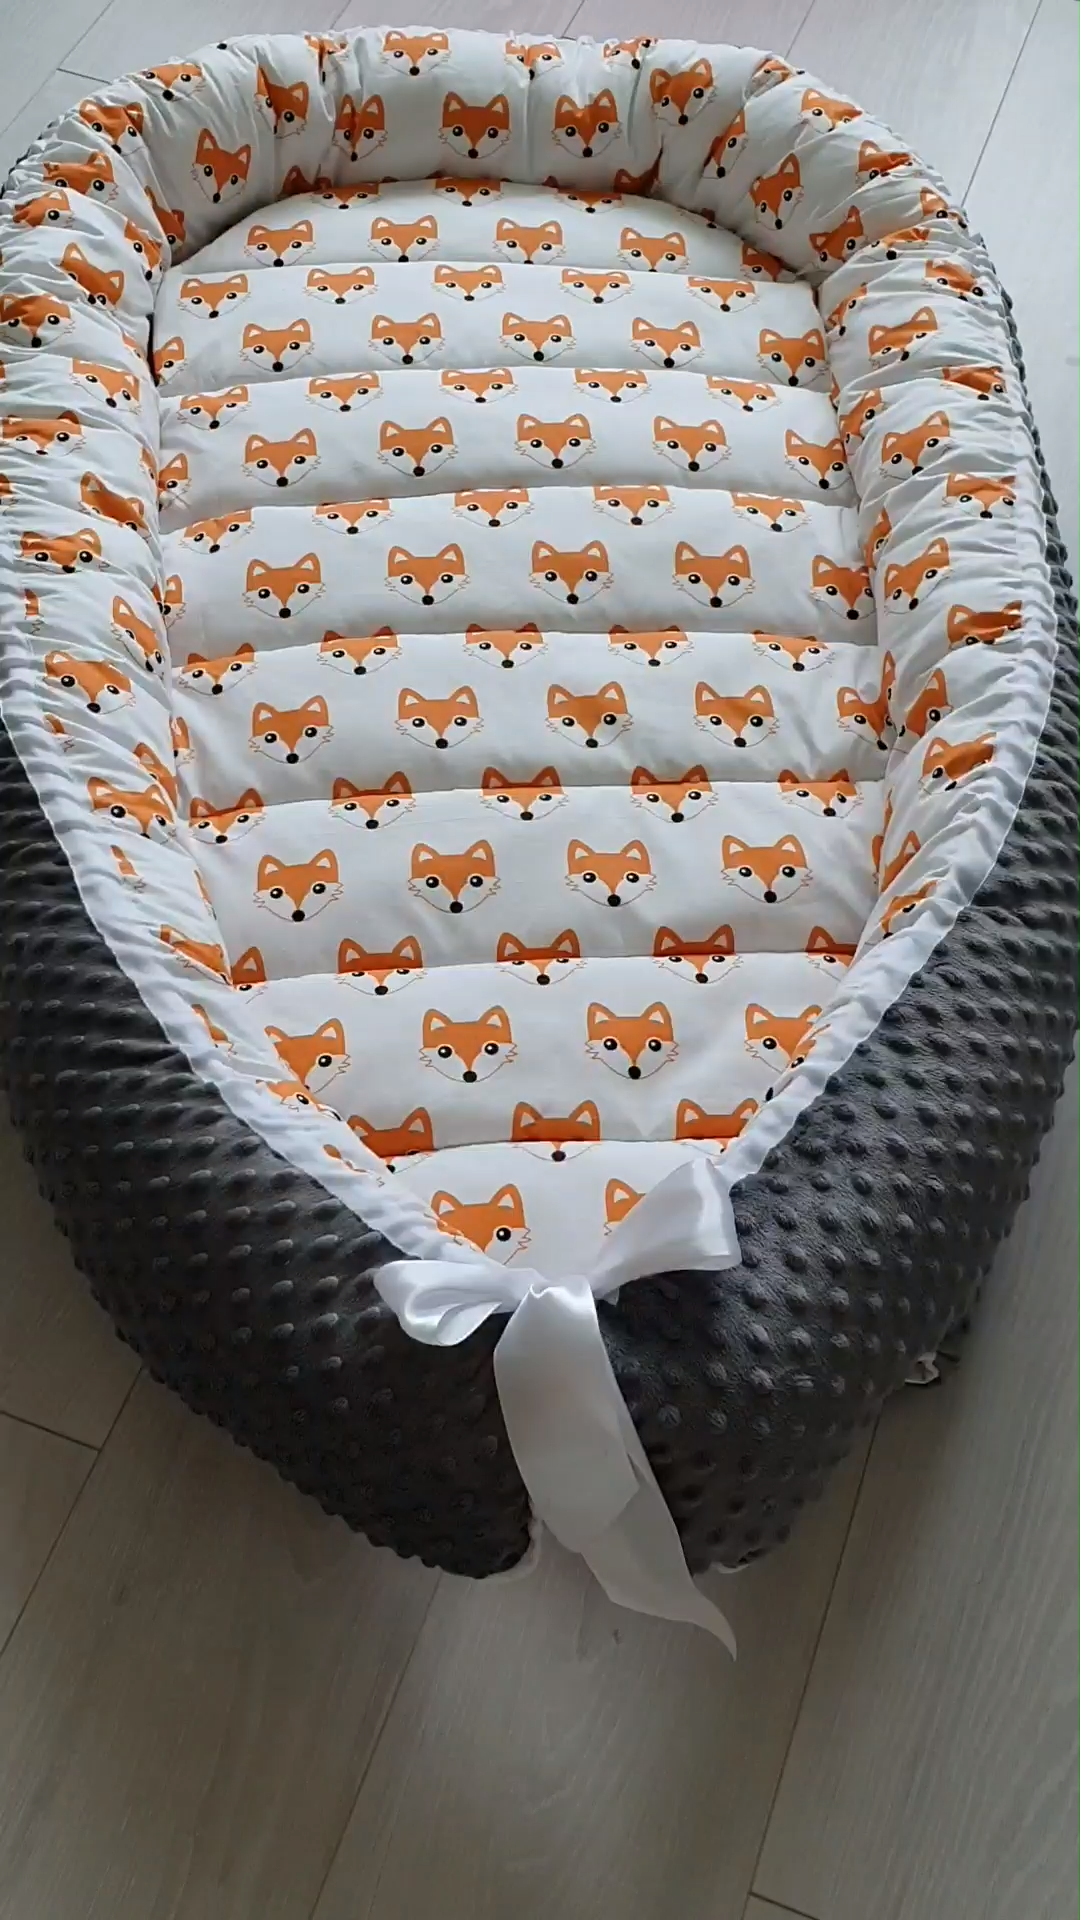 Toddler nest bed Sleeping bed Baby fox print Babynest Snuggle bed Cosleeper Travel bed Baby bedding - Toddler nest bed Sleeping bed Baby fox print Babynest Snuggle bed Cosleeper Travel bed Baby bedding -   9 diy Baby bassinet ideas